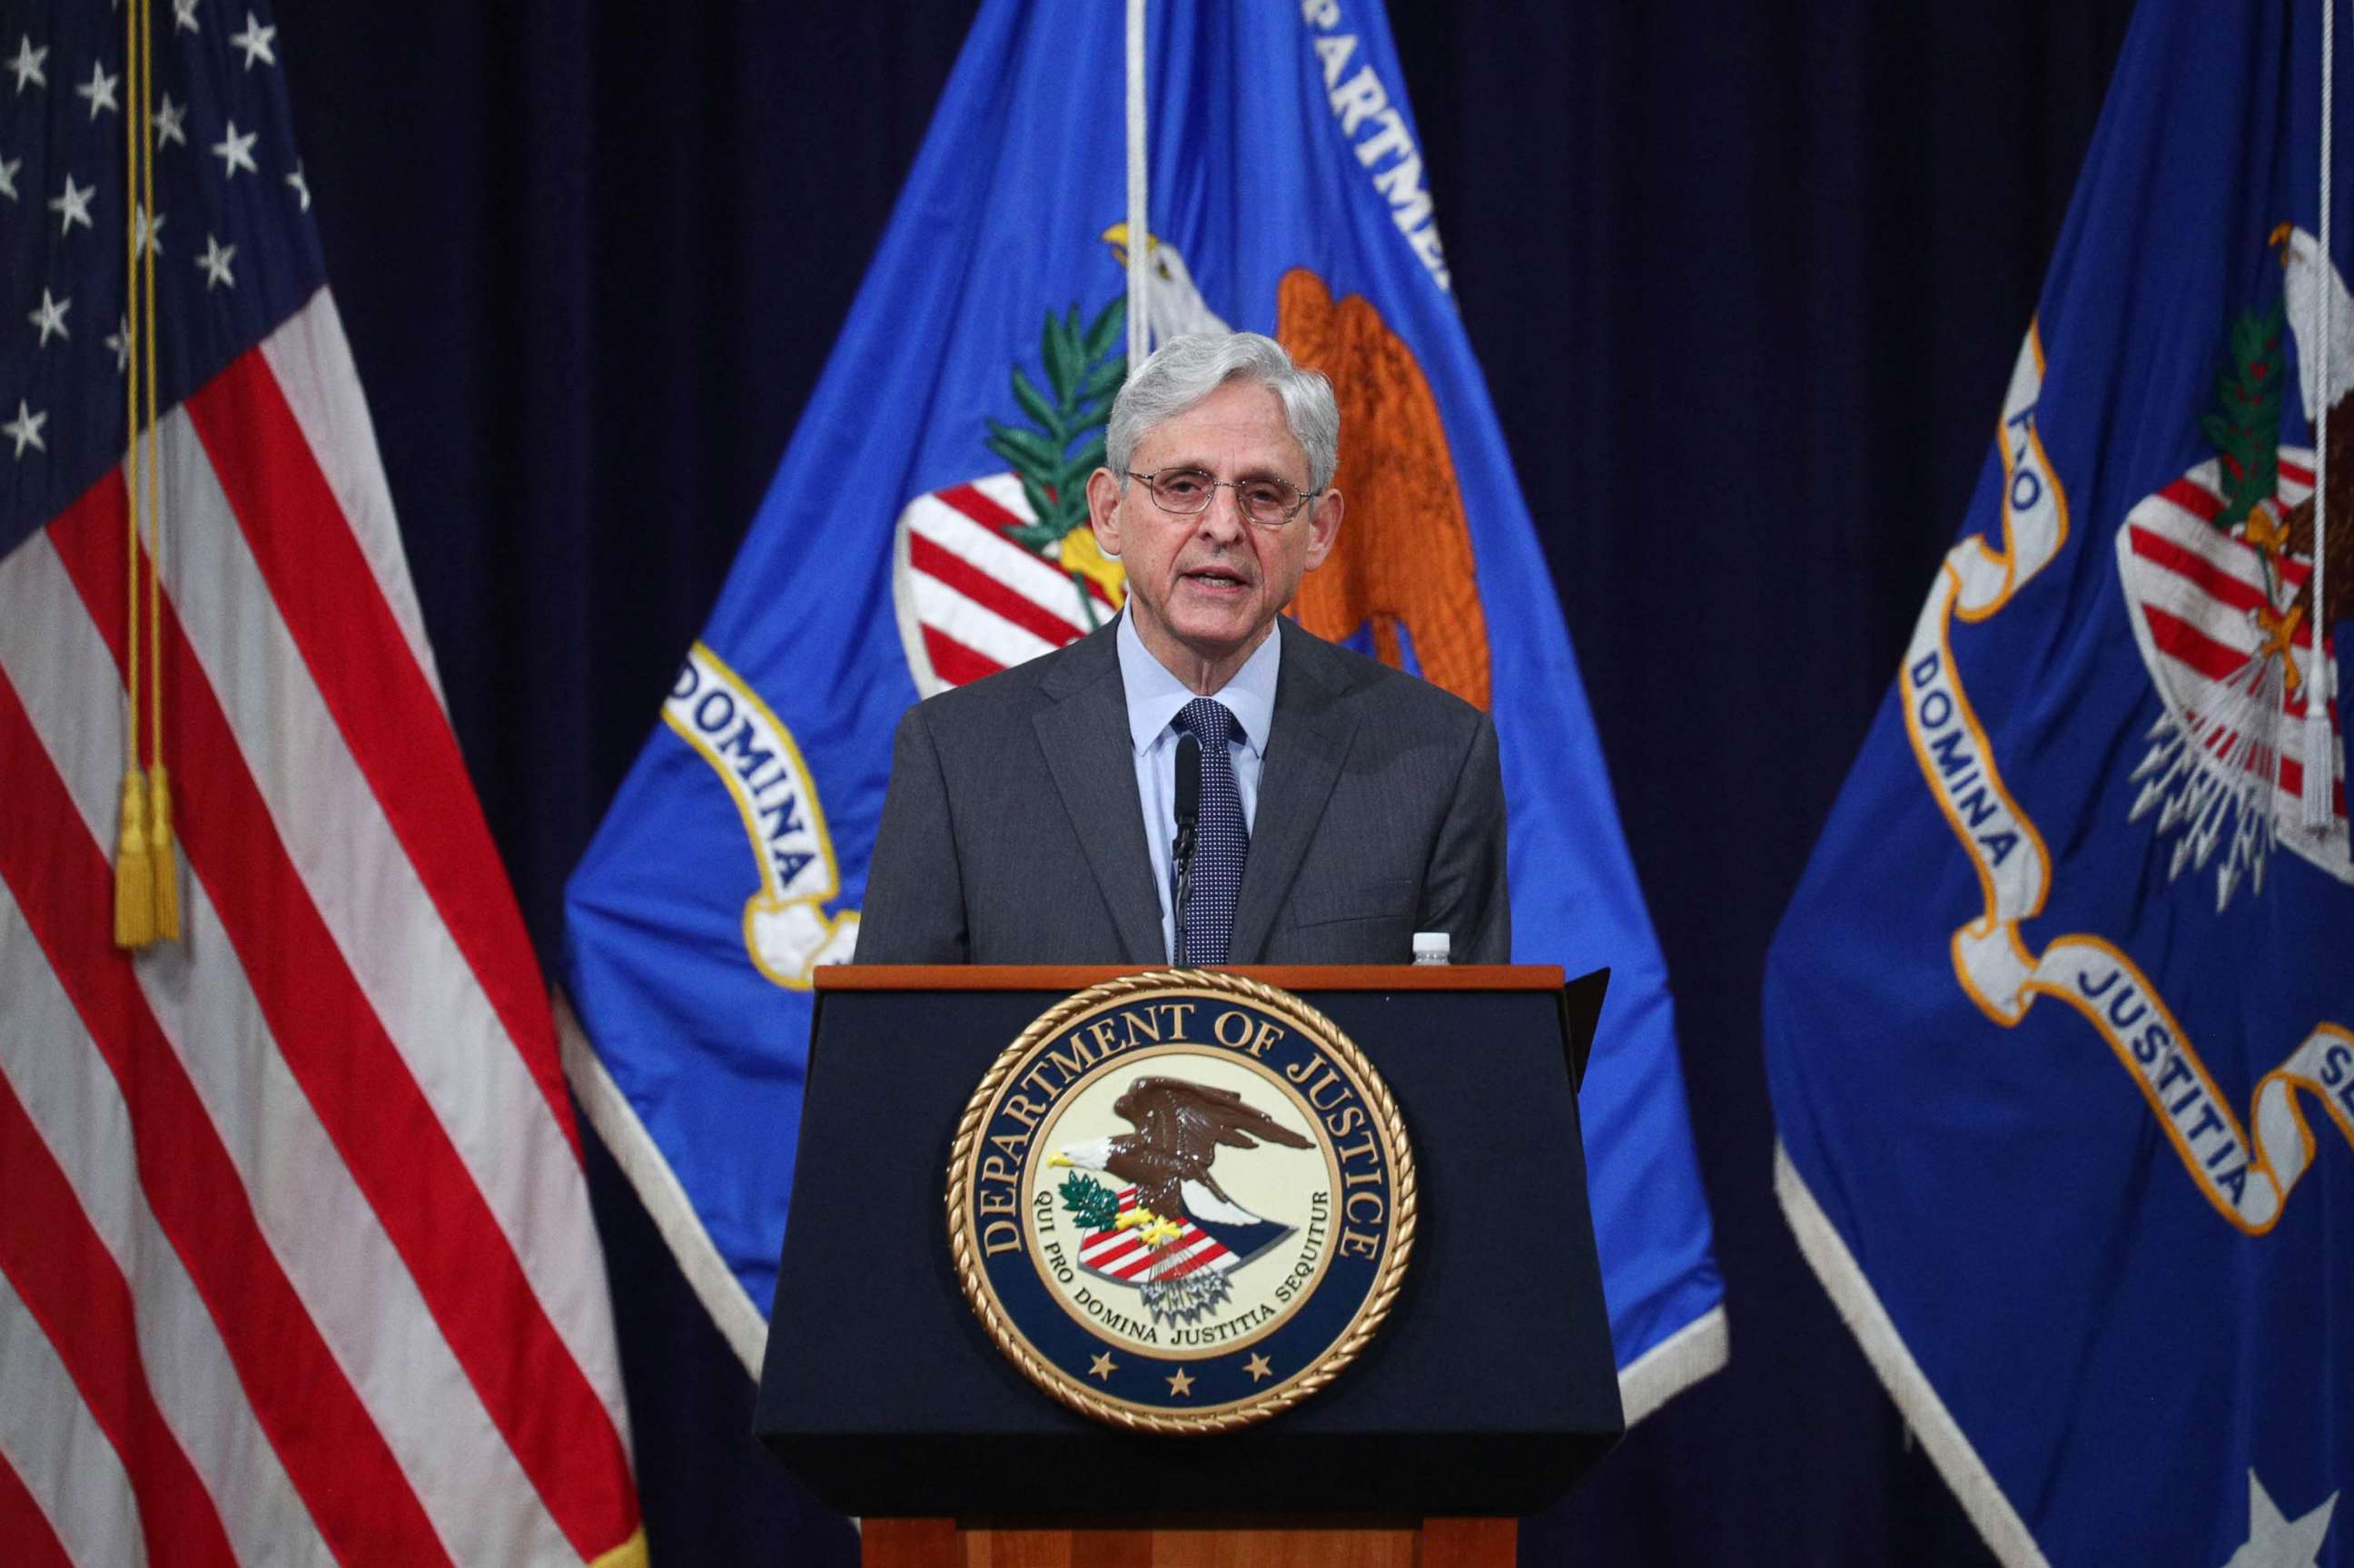 PHOTO: U.S. Attorney General Merrick Garland delivers remarks on voting rights at the epartment of Justice in Washington, D.C., on June 11, 2021.